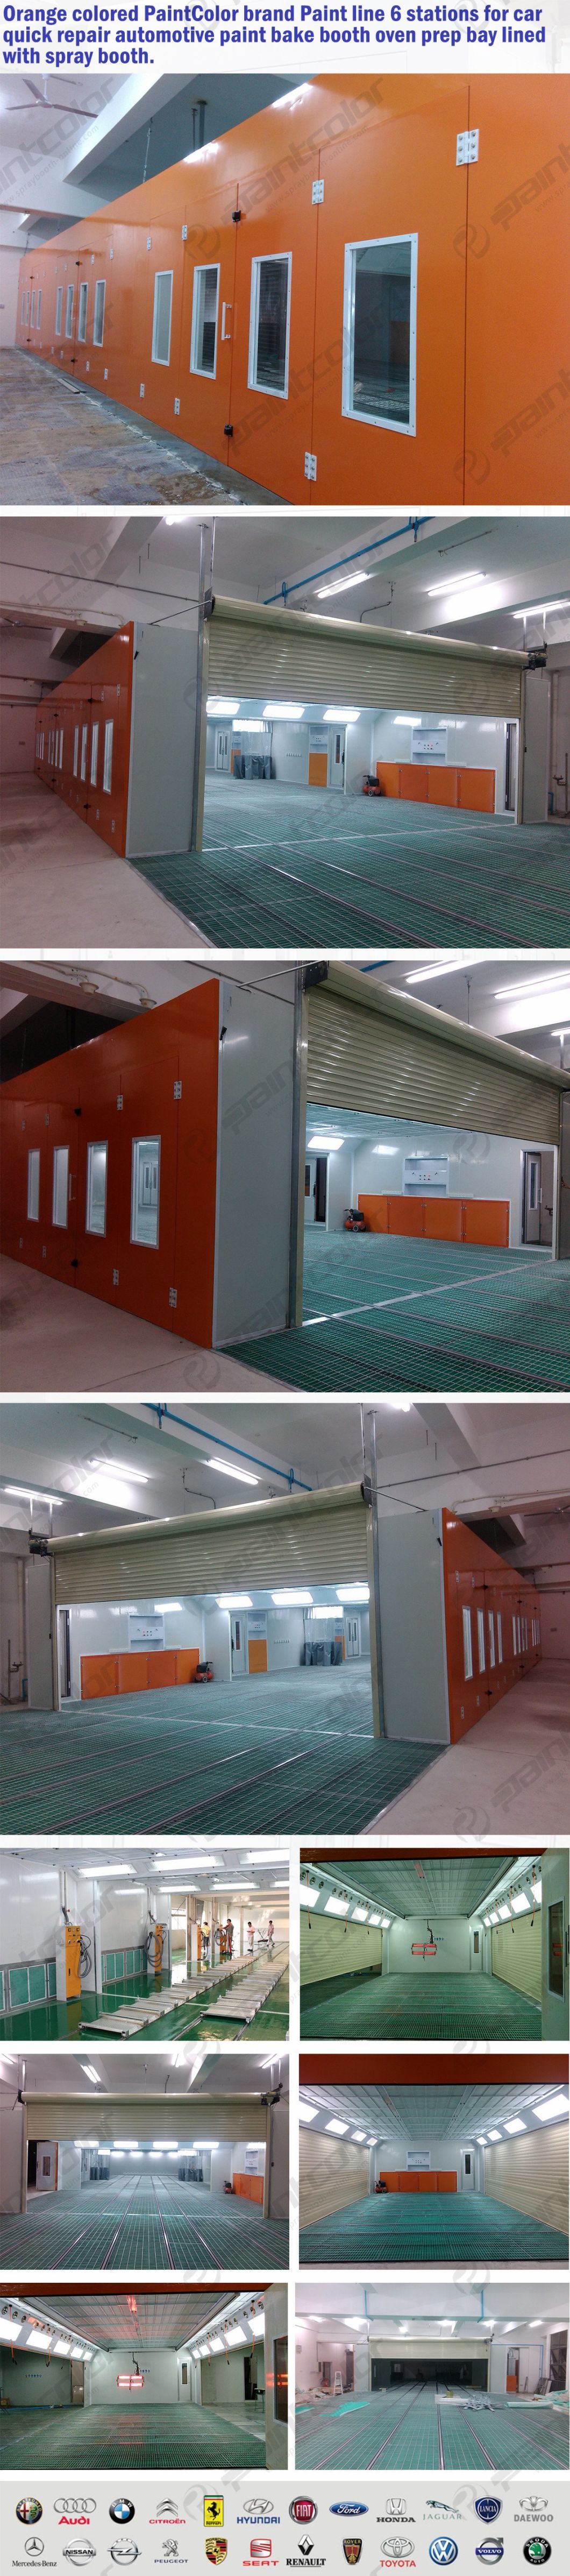 Combination Spray Booth and Baking Oven Energy Saving Paint Booth with Smart Control Panels